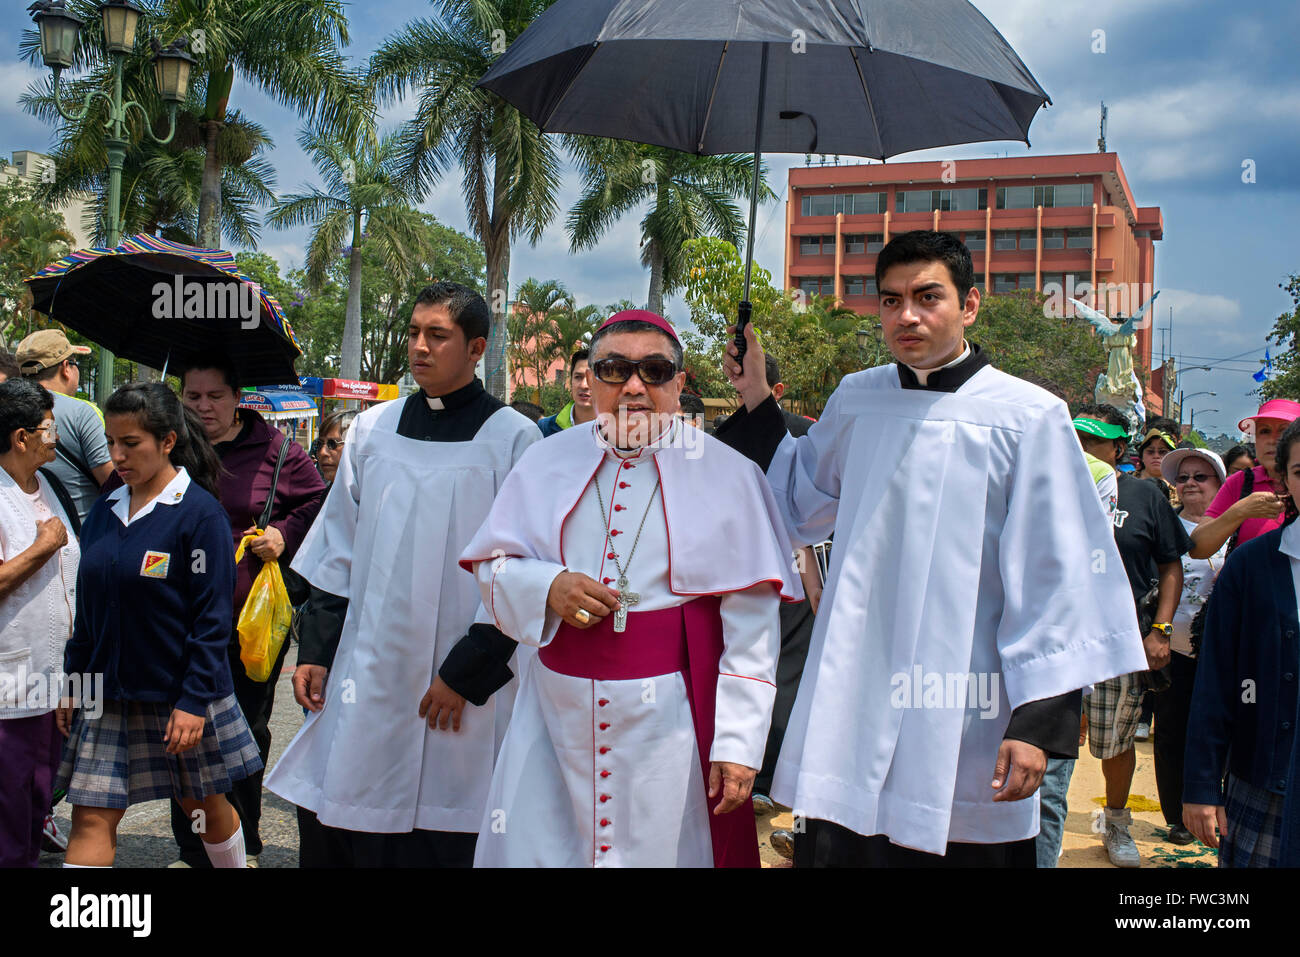 Óscar Vian, the archbishop of Guatemala. Holy Week processions in Guatemala city. Holy Thursday. Holy Week in Guatemala is celeb Stock Photo